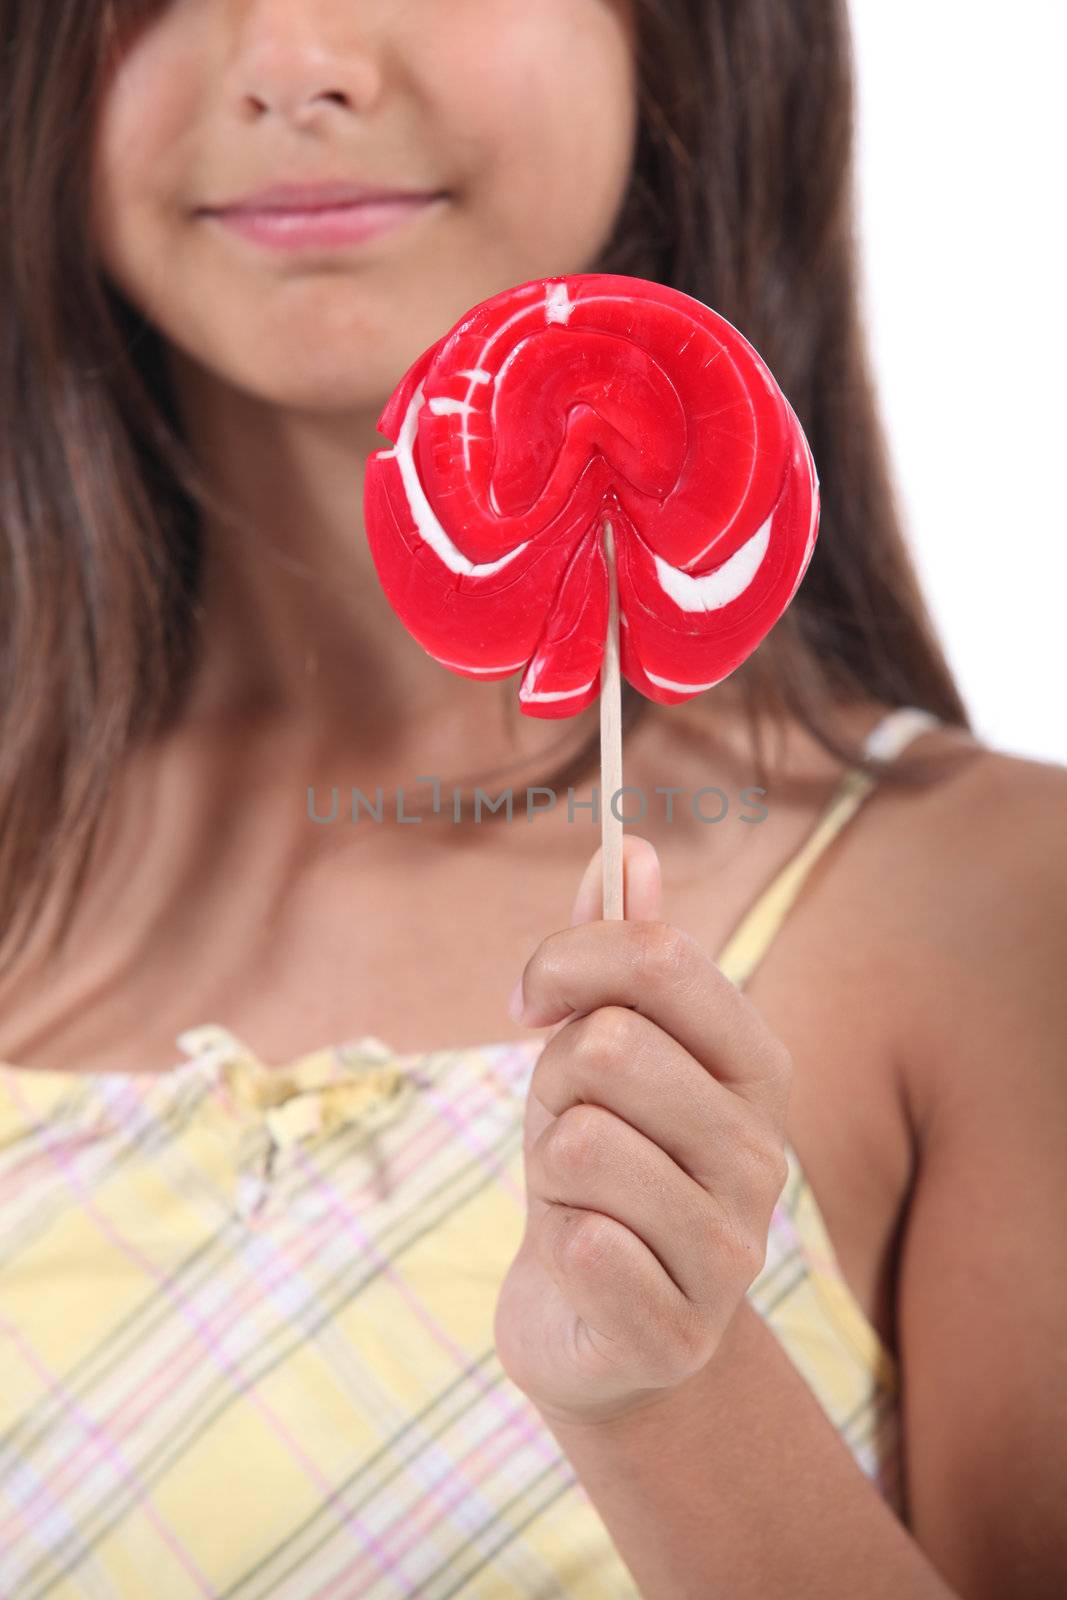 Girl holding a lolly pop